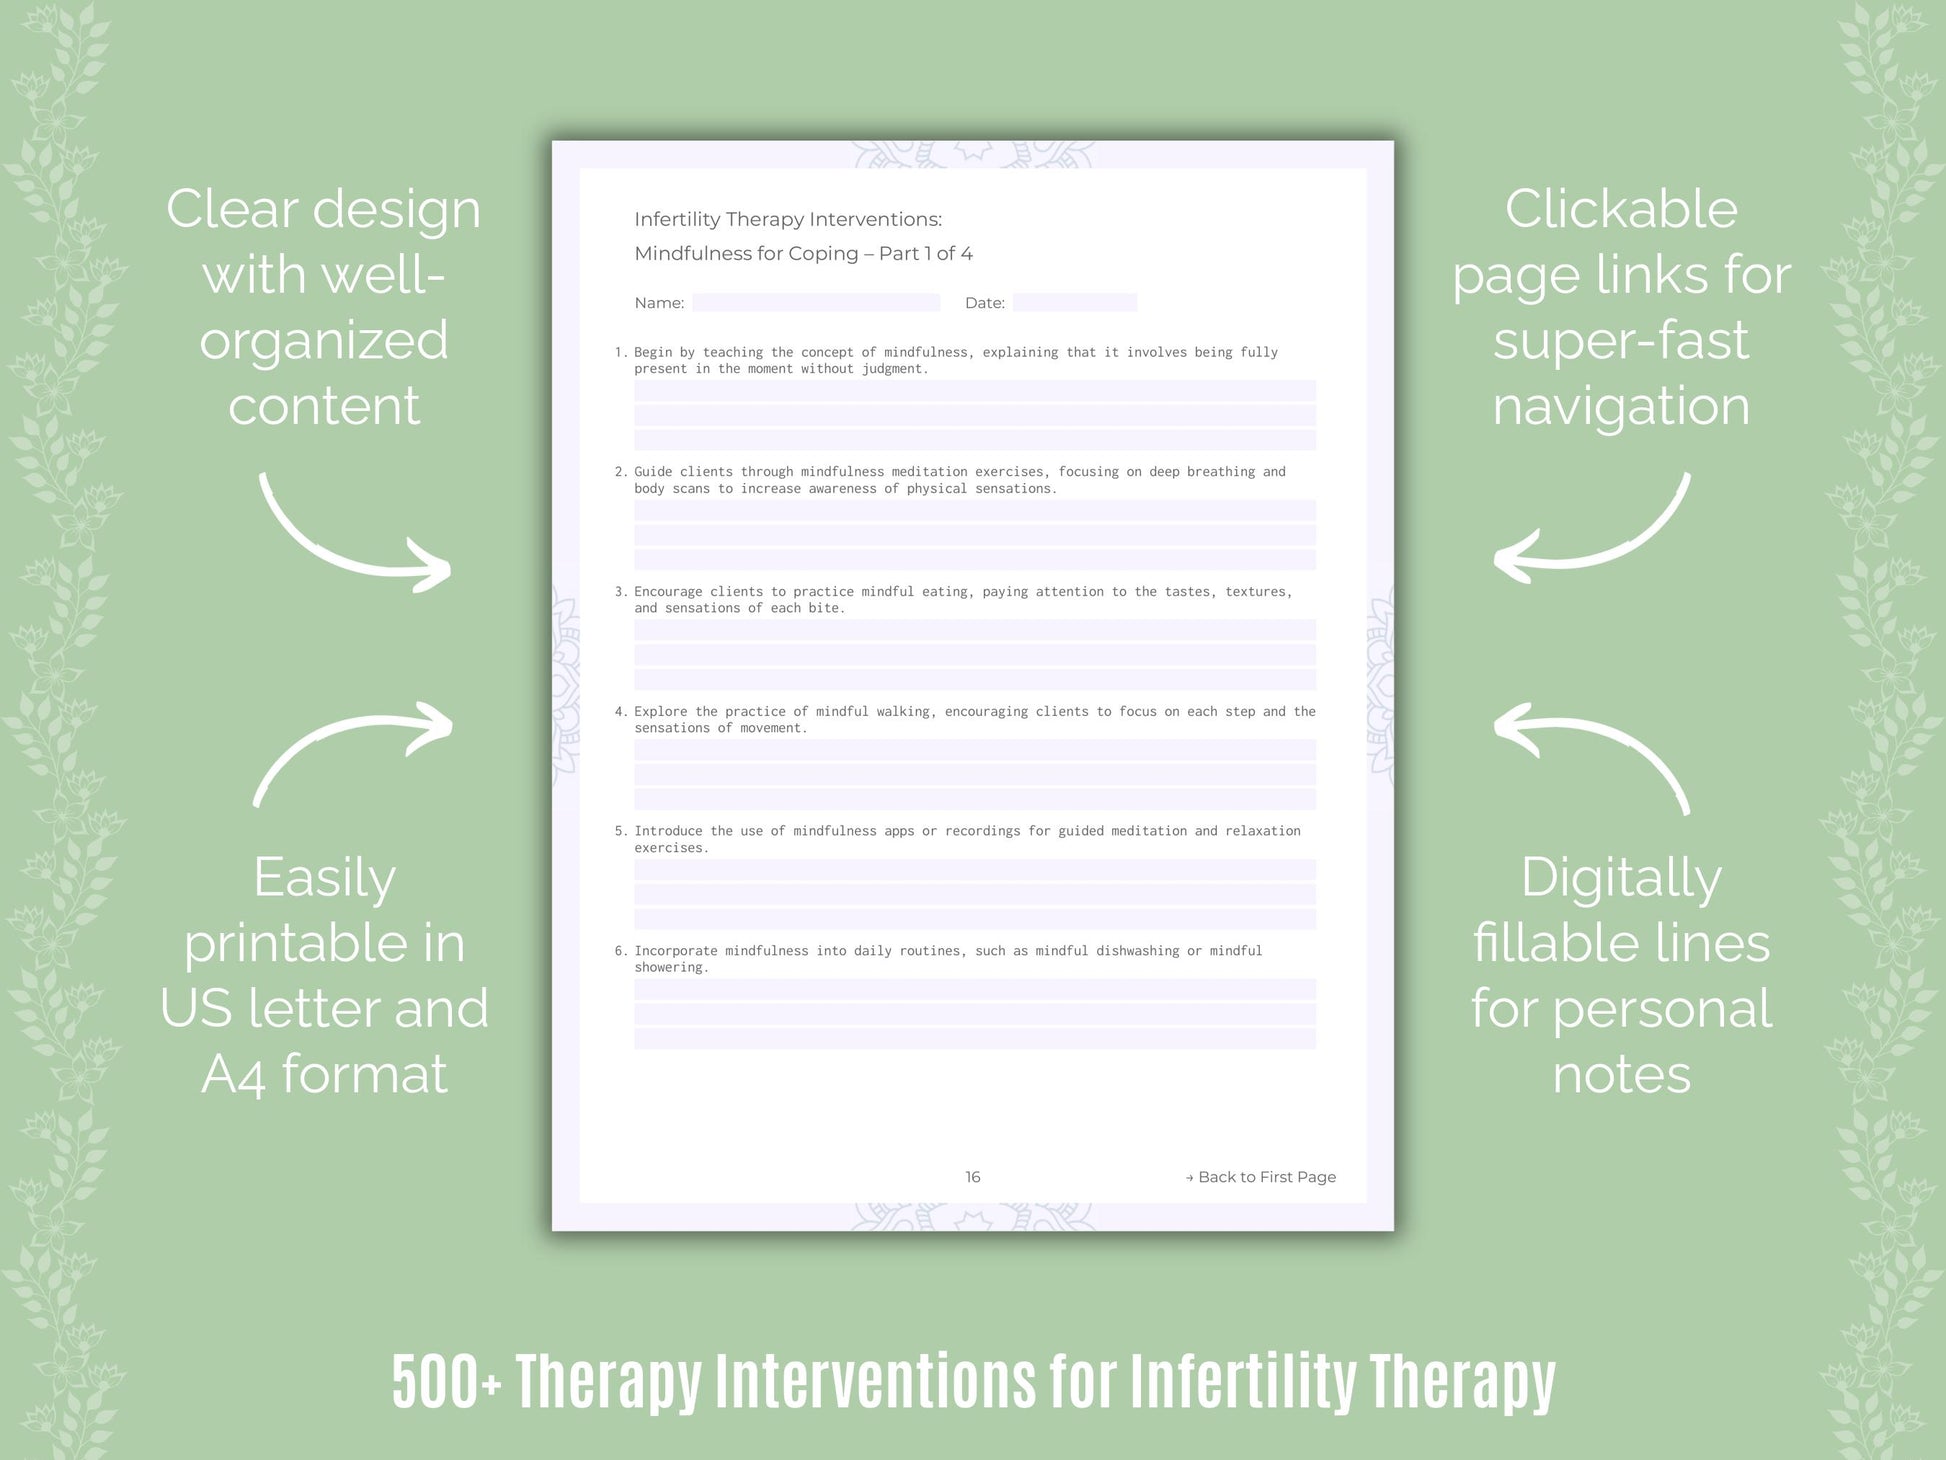 Infertility Therapy Interventions Resource